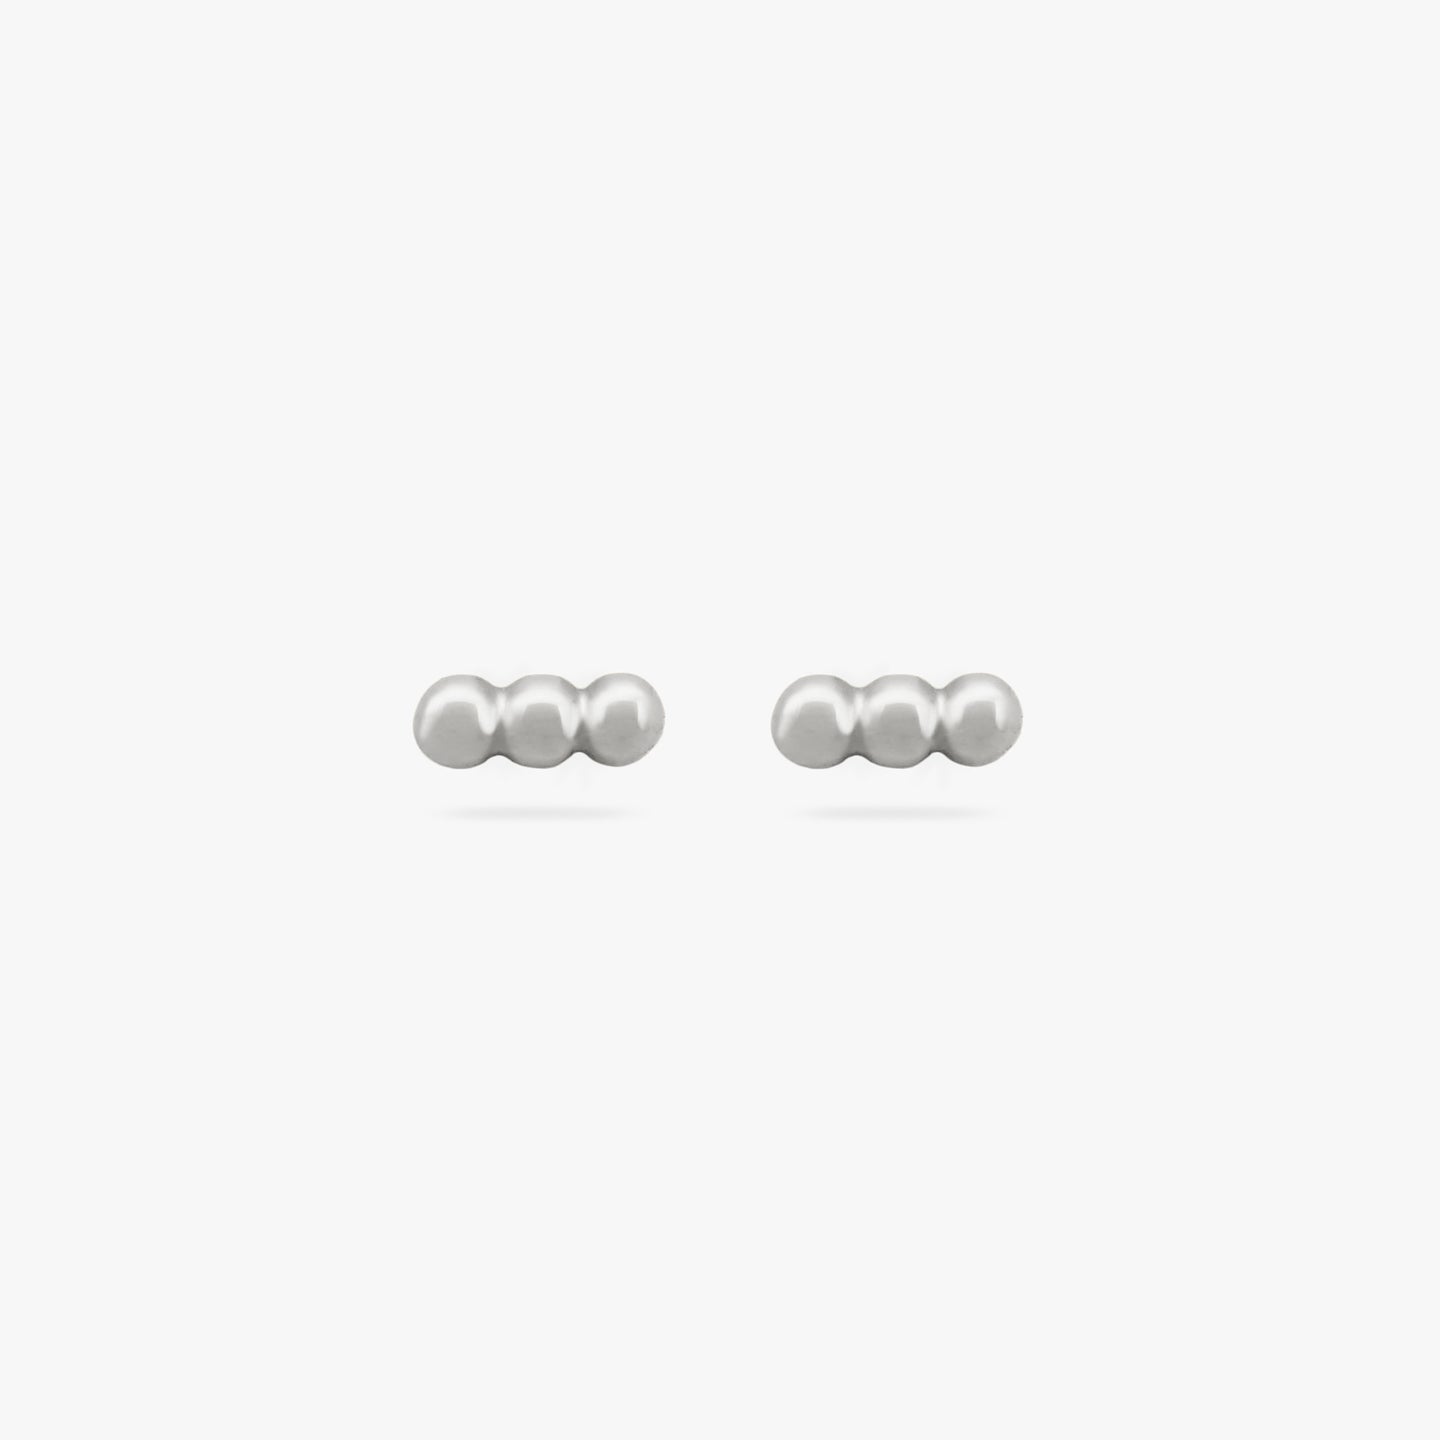 A pair of three silver beads arranged in two bar studs [pair] color:null|silver